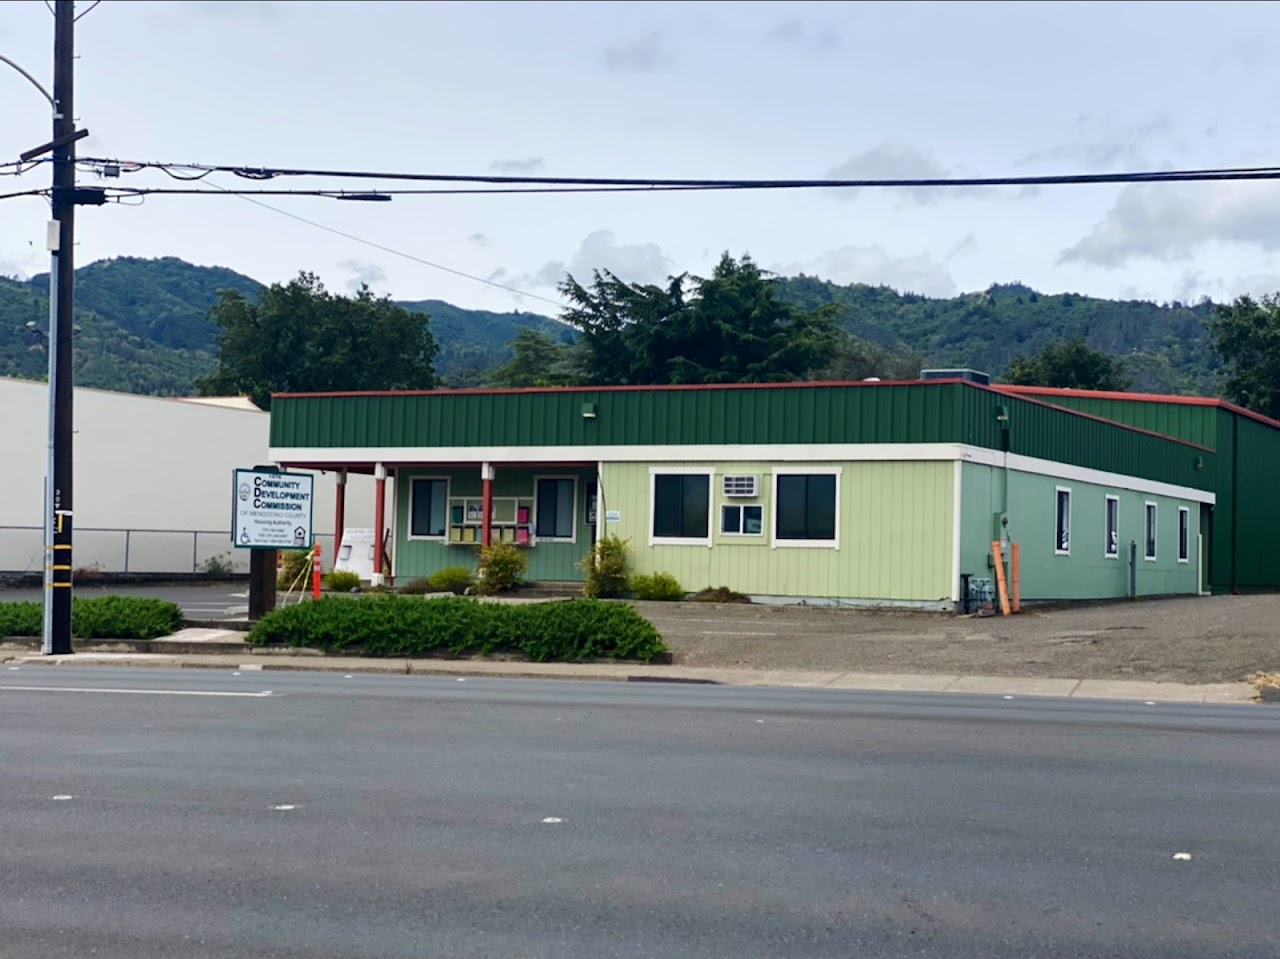 Photo of MENDOCINO COUNTY. Affordable housing located at 1076 N STATE Street UKIAH, CA 95482